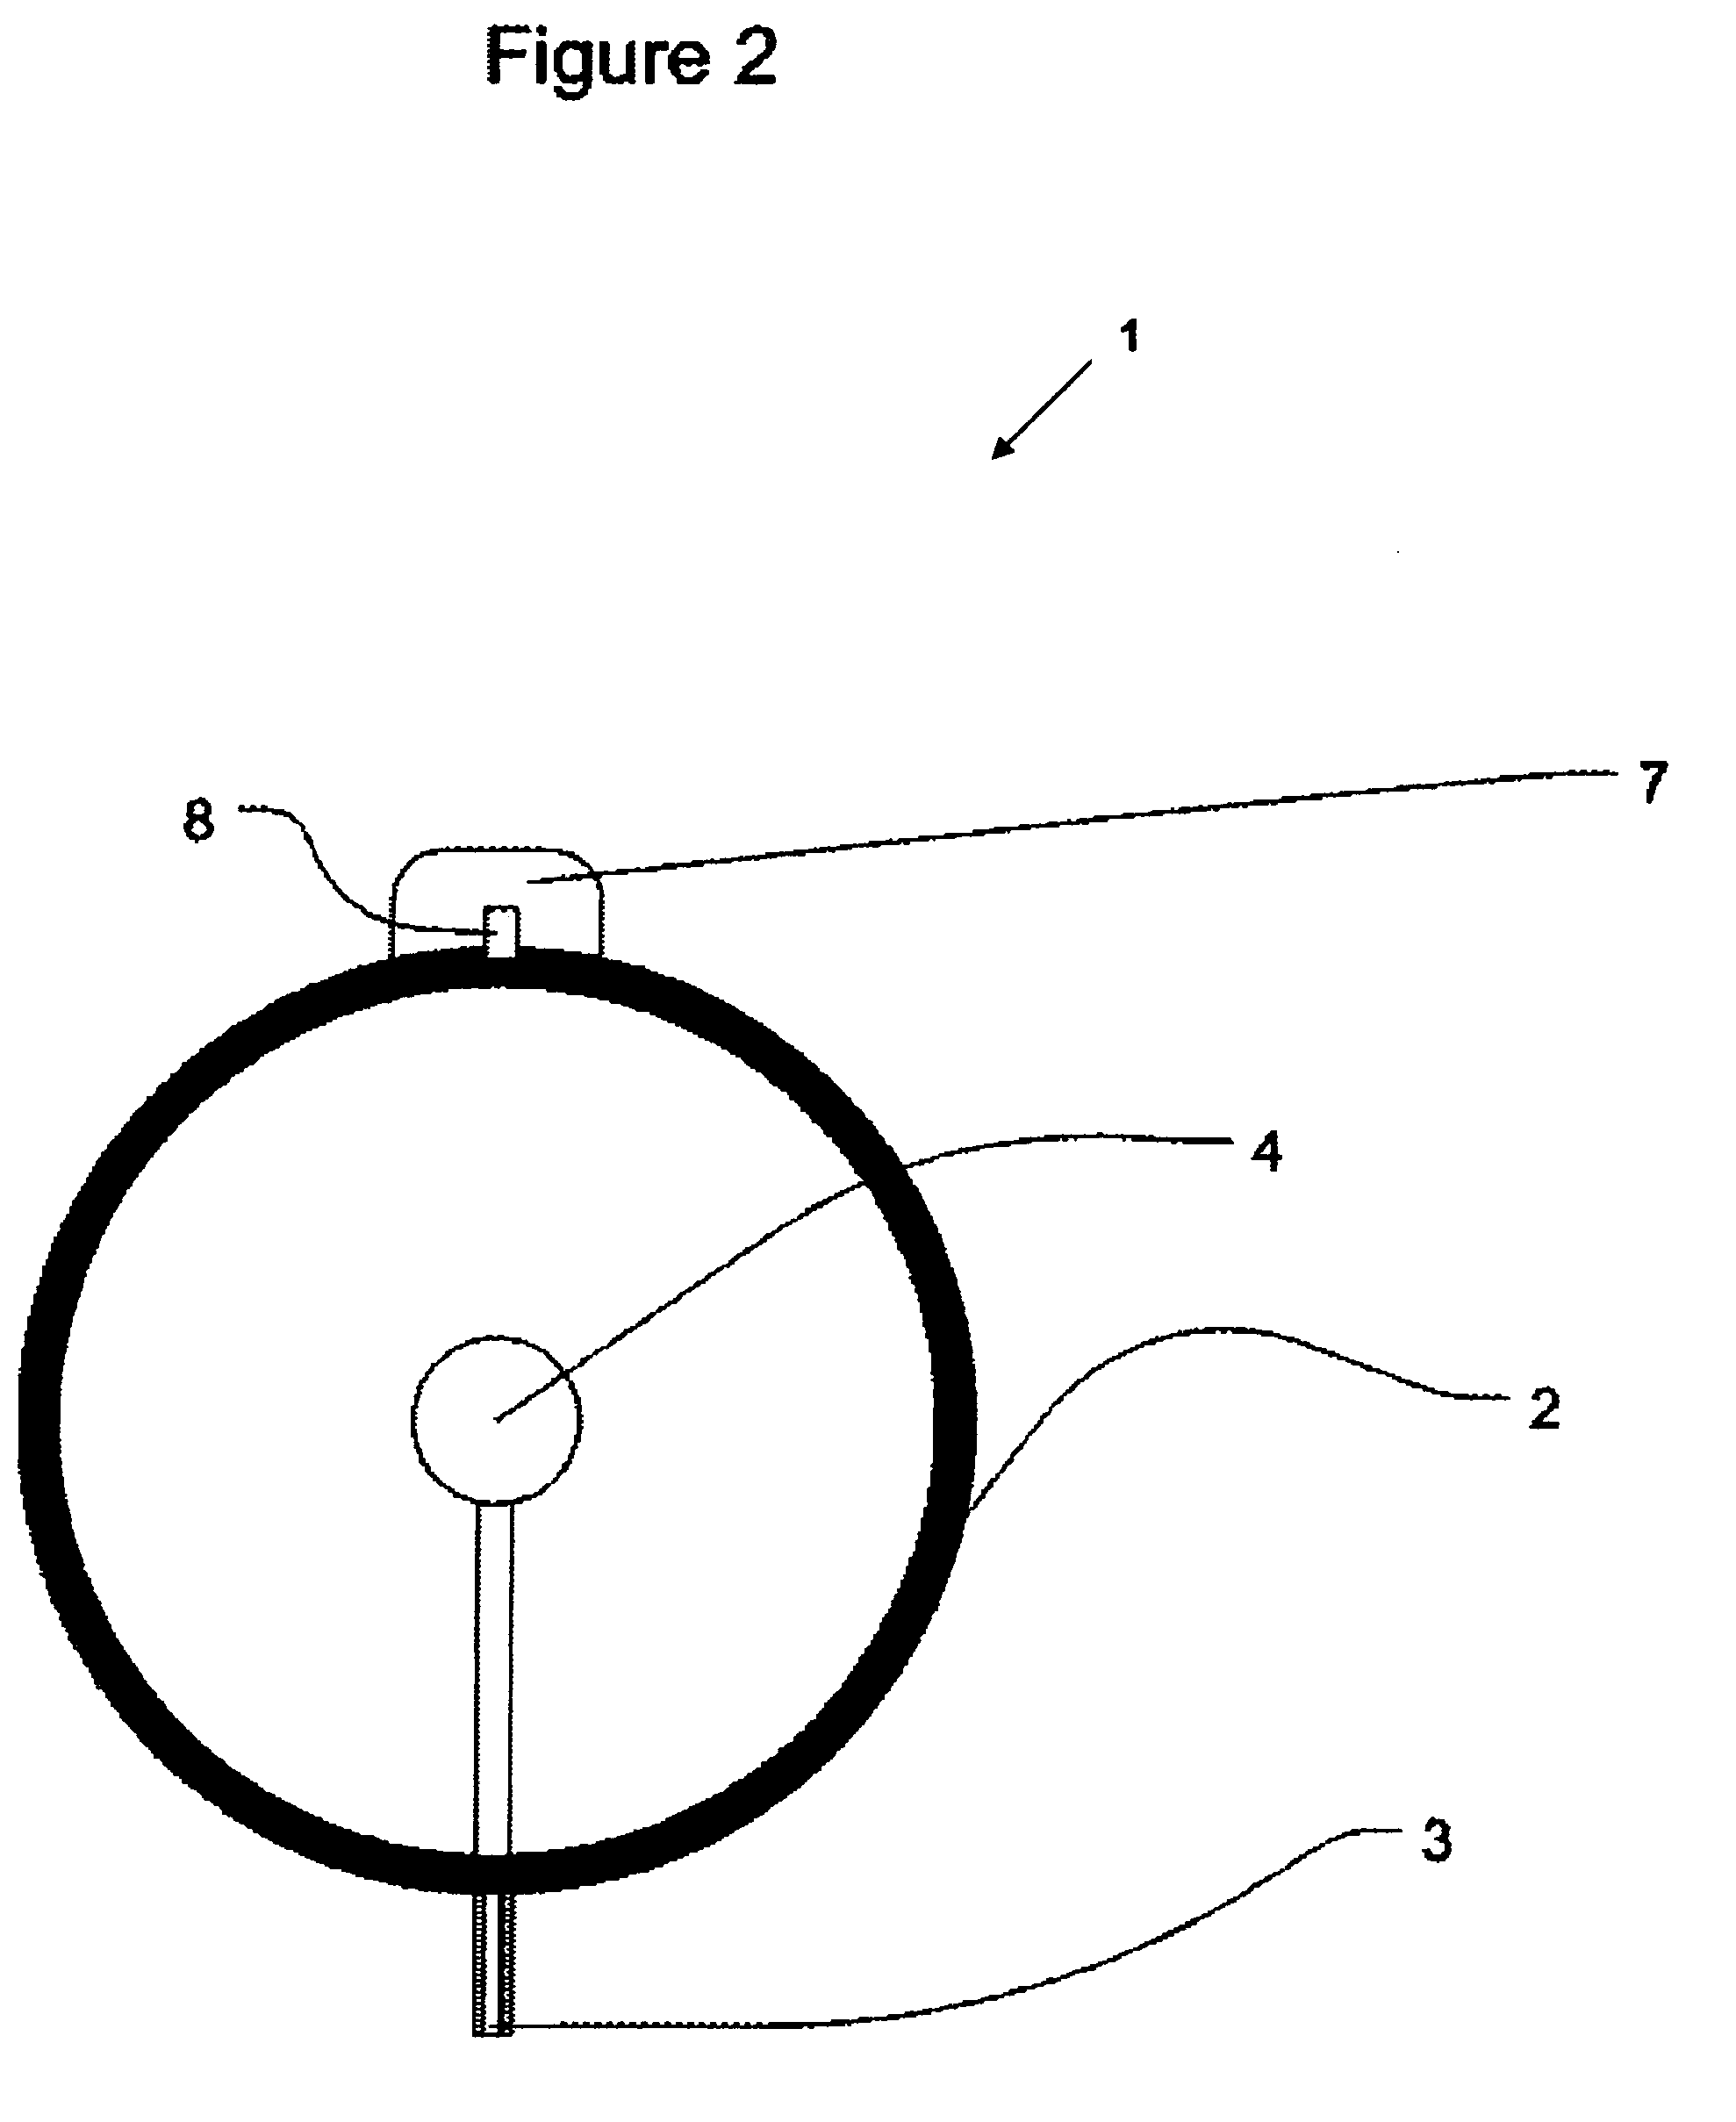 Air disinfecting system and cartridge device containing ultraviolet light